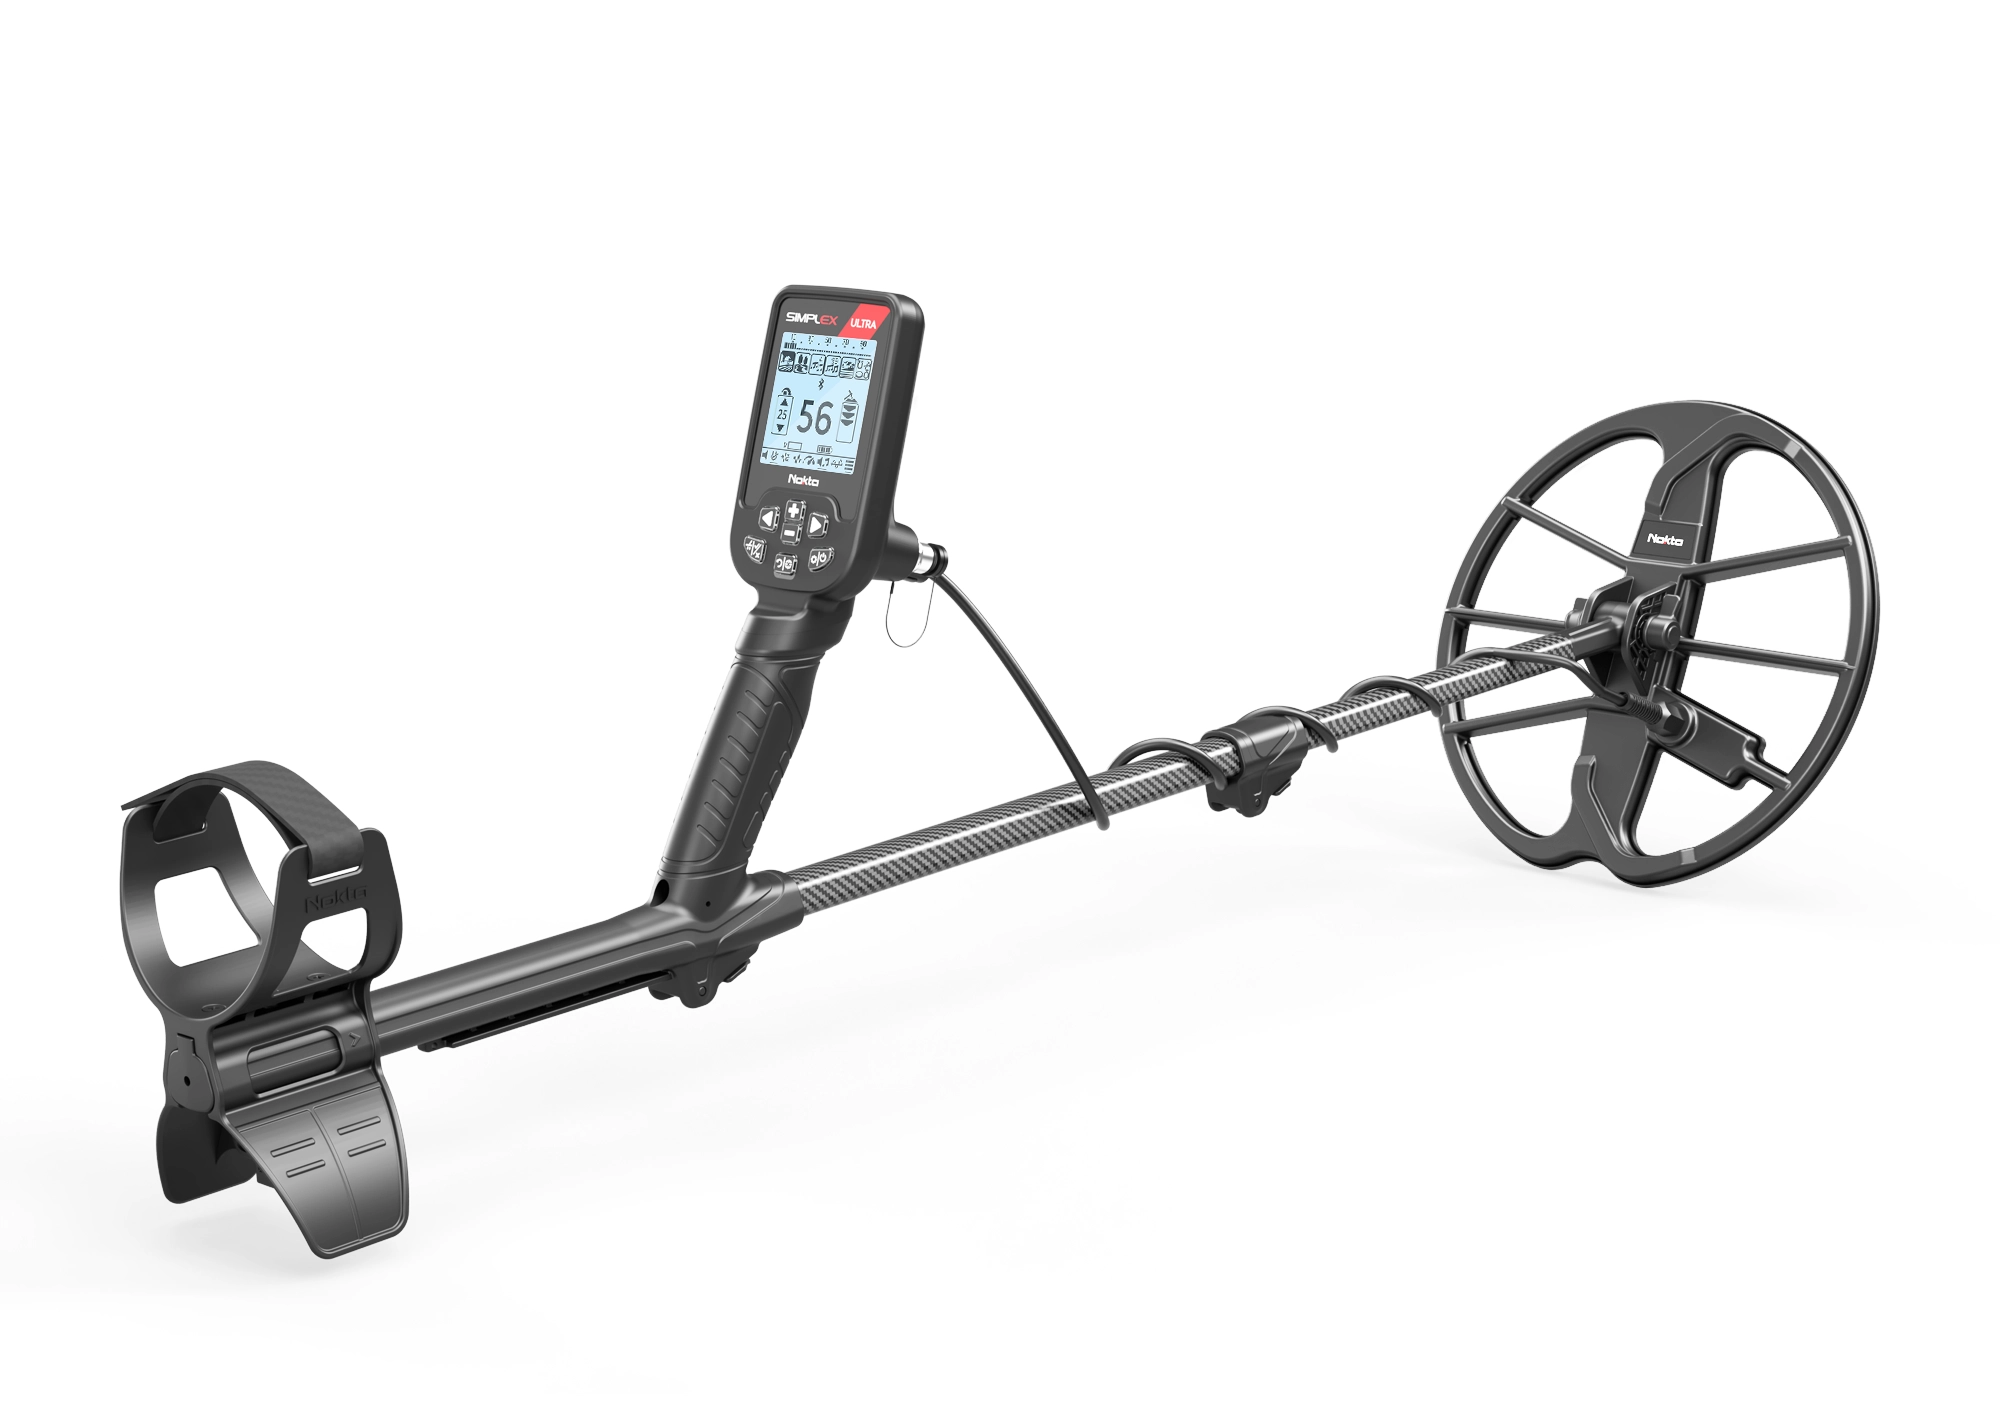 Nokta Simplex ULTRA Metal Detector, with Carbon Fiber Shafts and Bluetooth Wireless Headphone Compatible